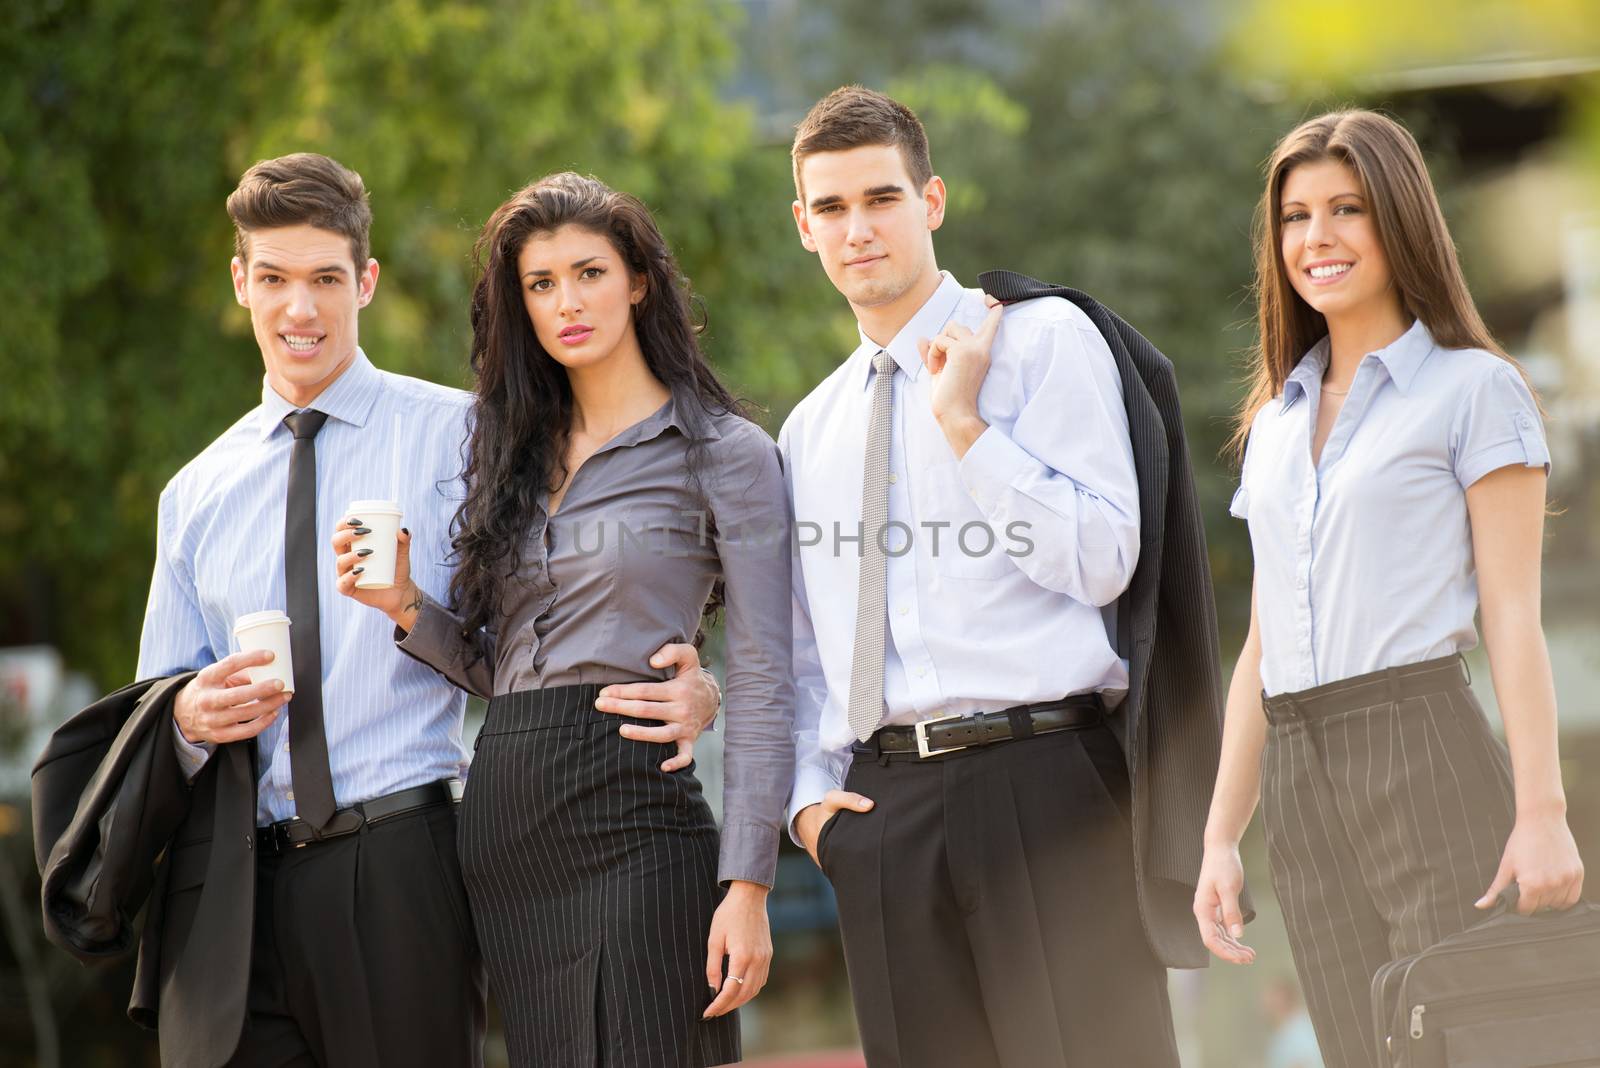 Portrait of group of young successful business people dressed in suits,on coffee break standing outside, smiling looking at camera.